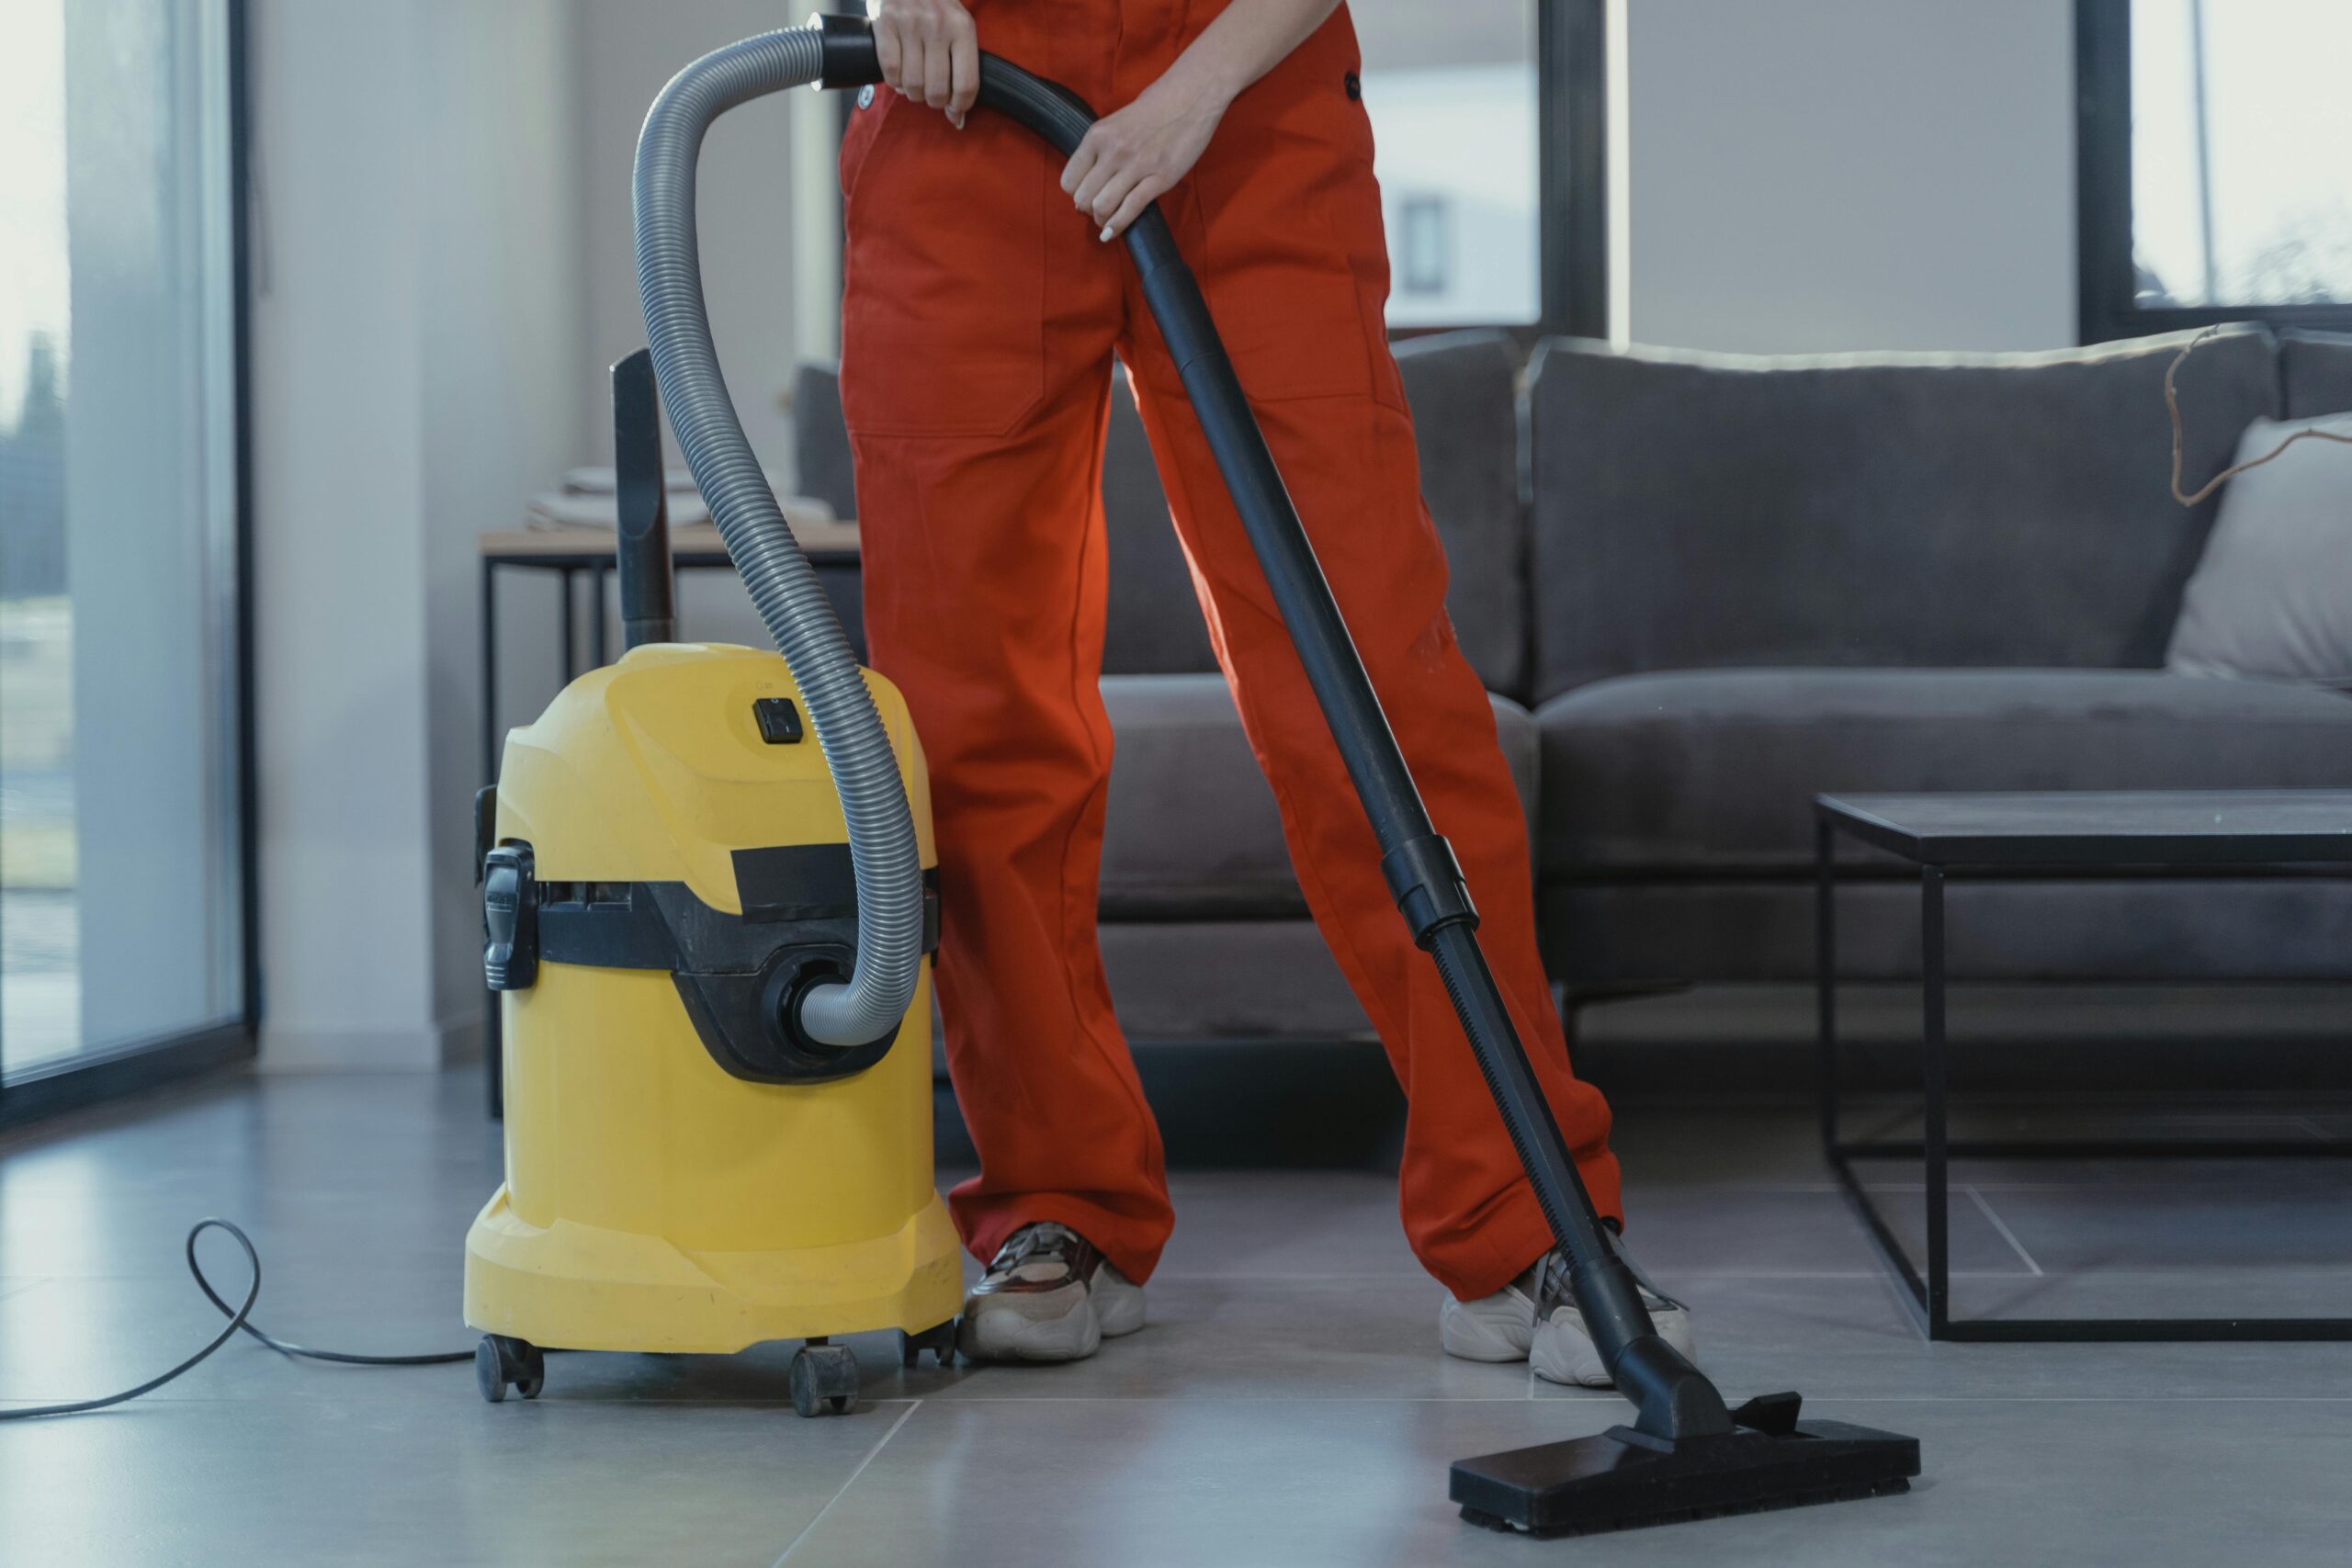 Cleaning Services in Singapore